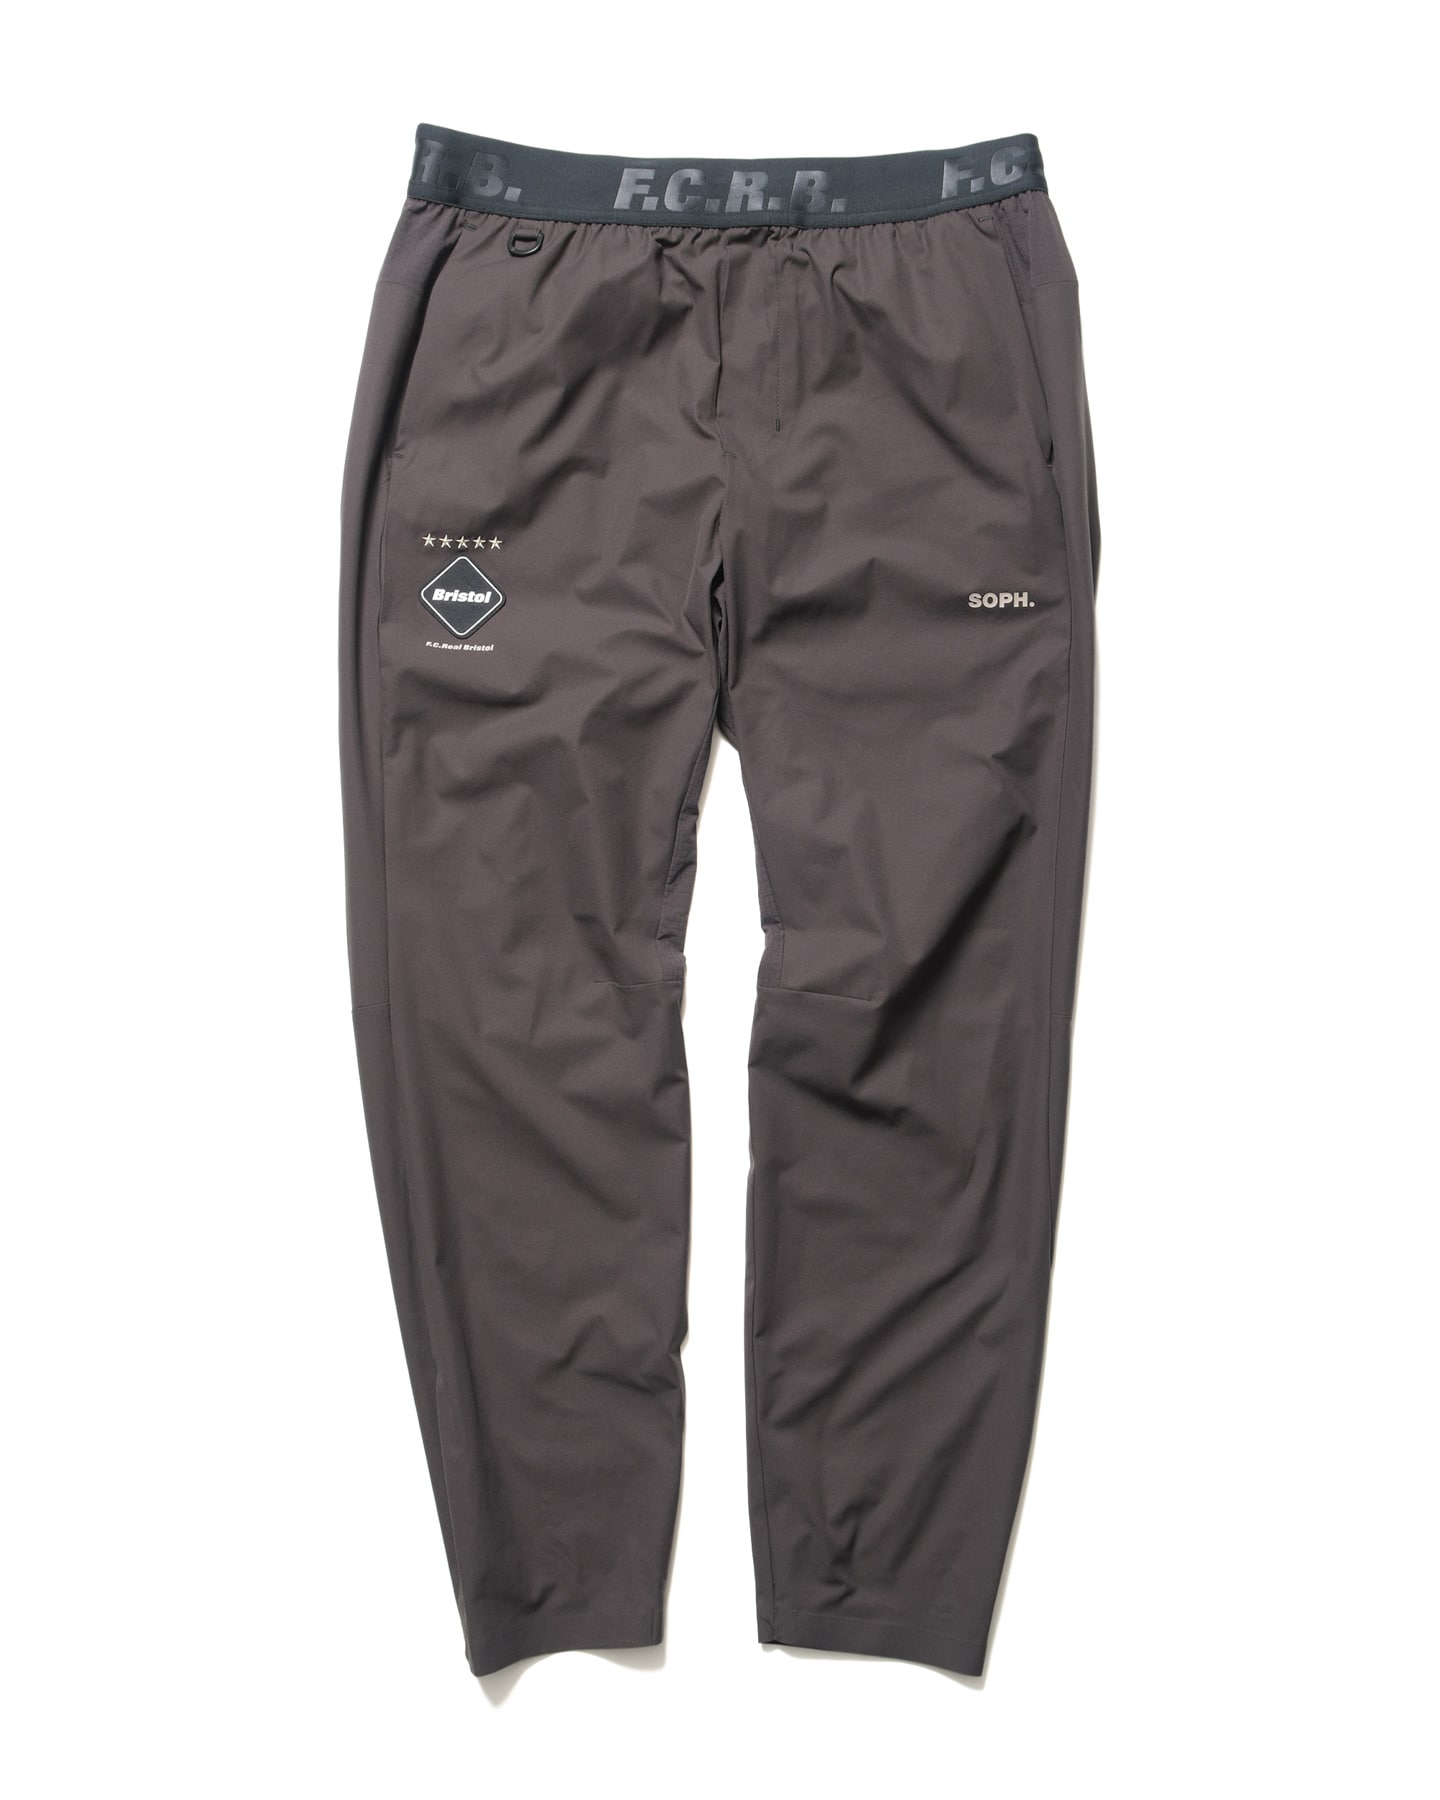 SOPH. | STRETCH LIGHT WEIGHT TAPERED EASY PANTS(S BROWN):